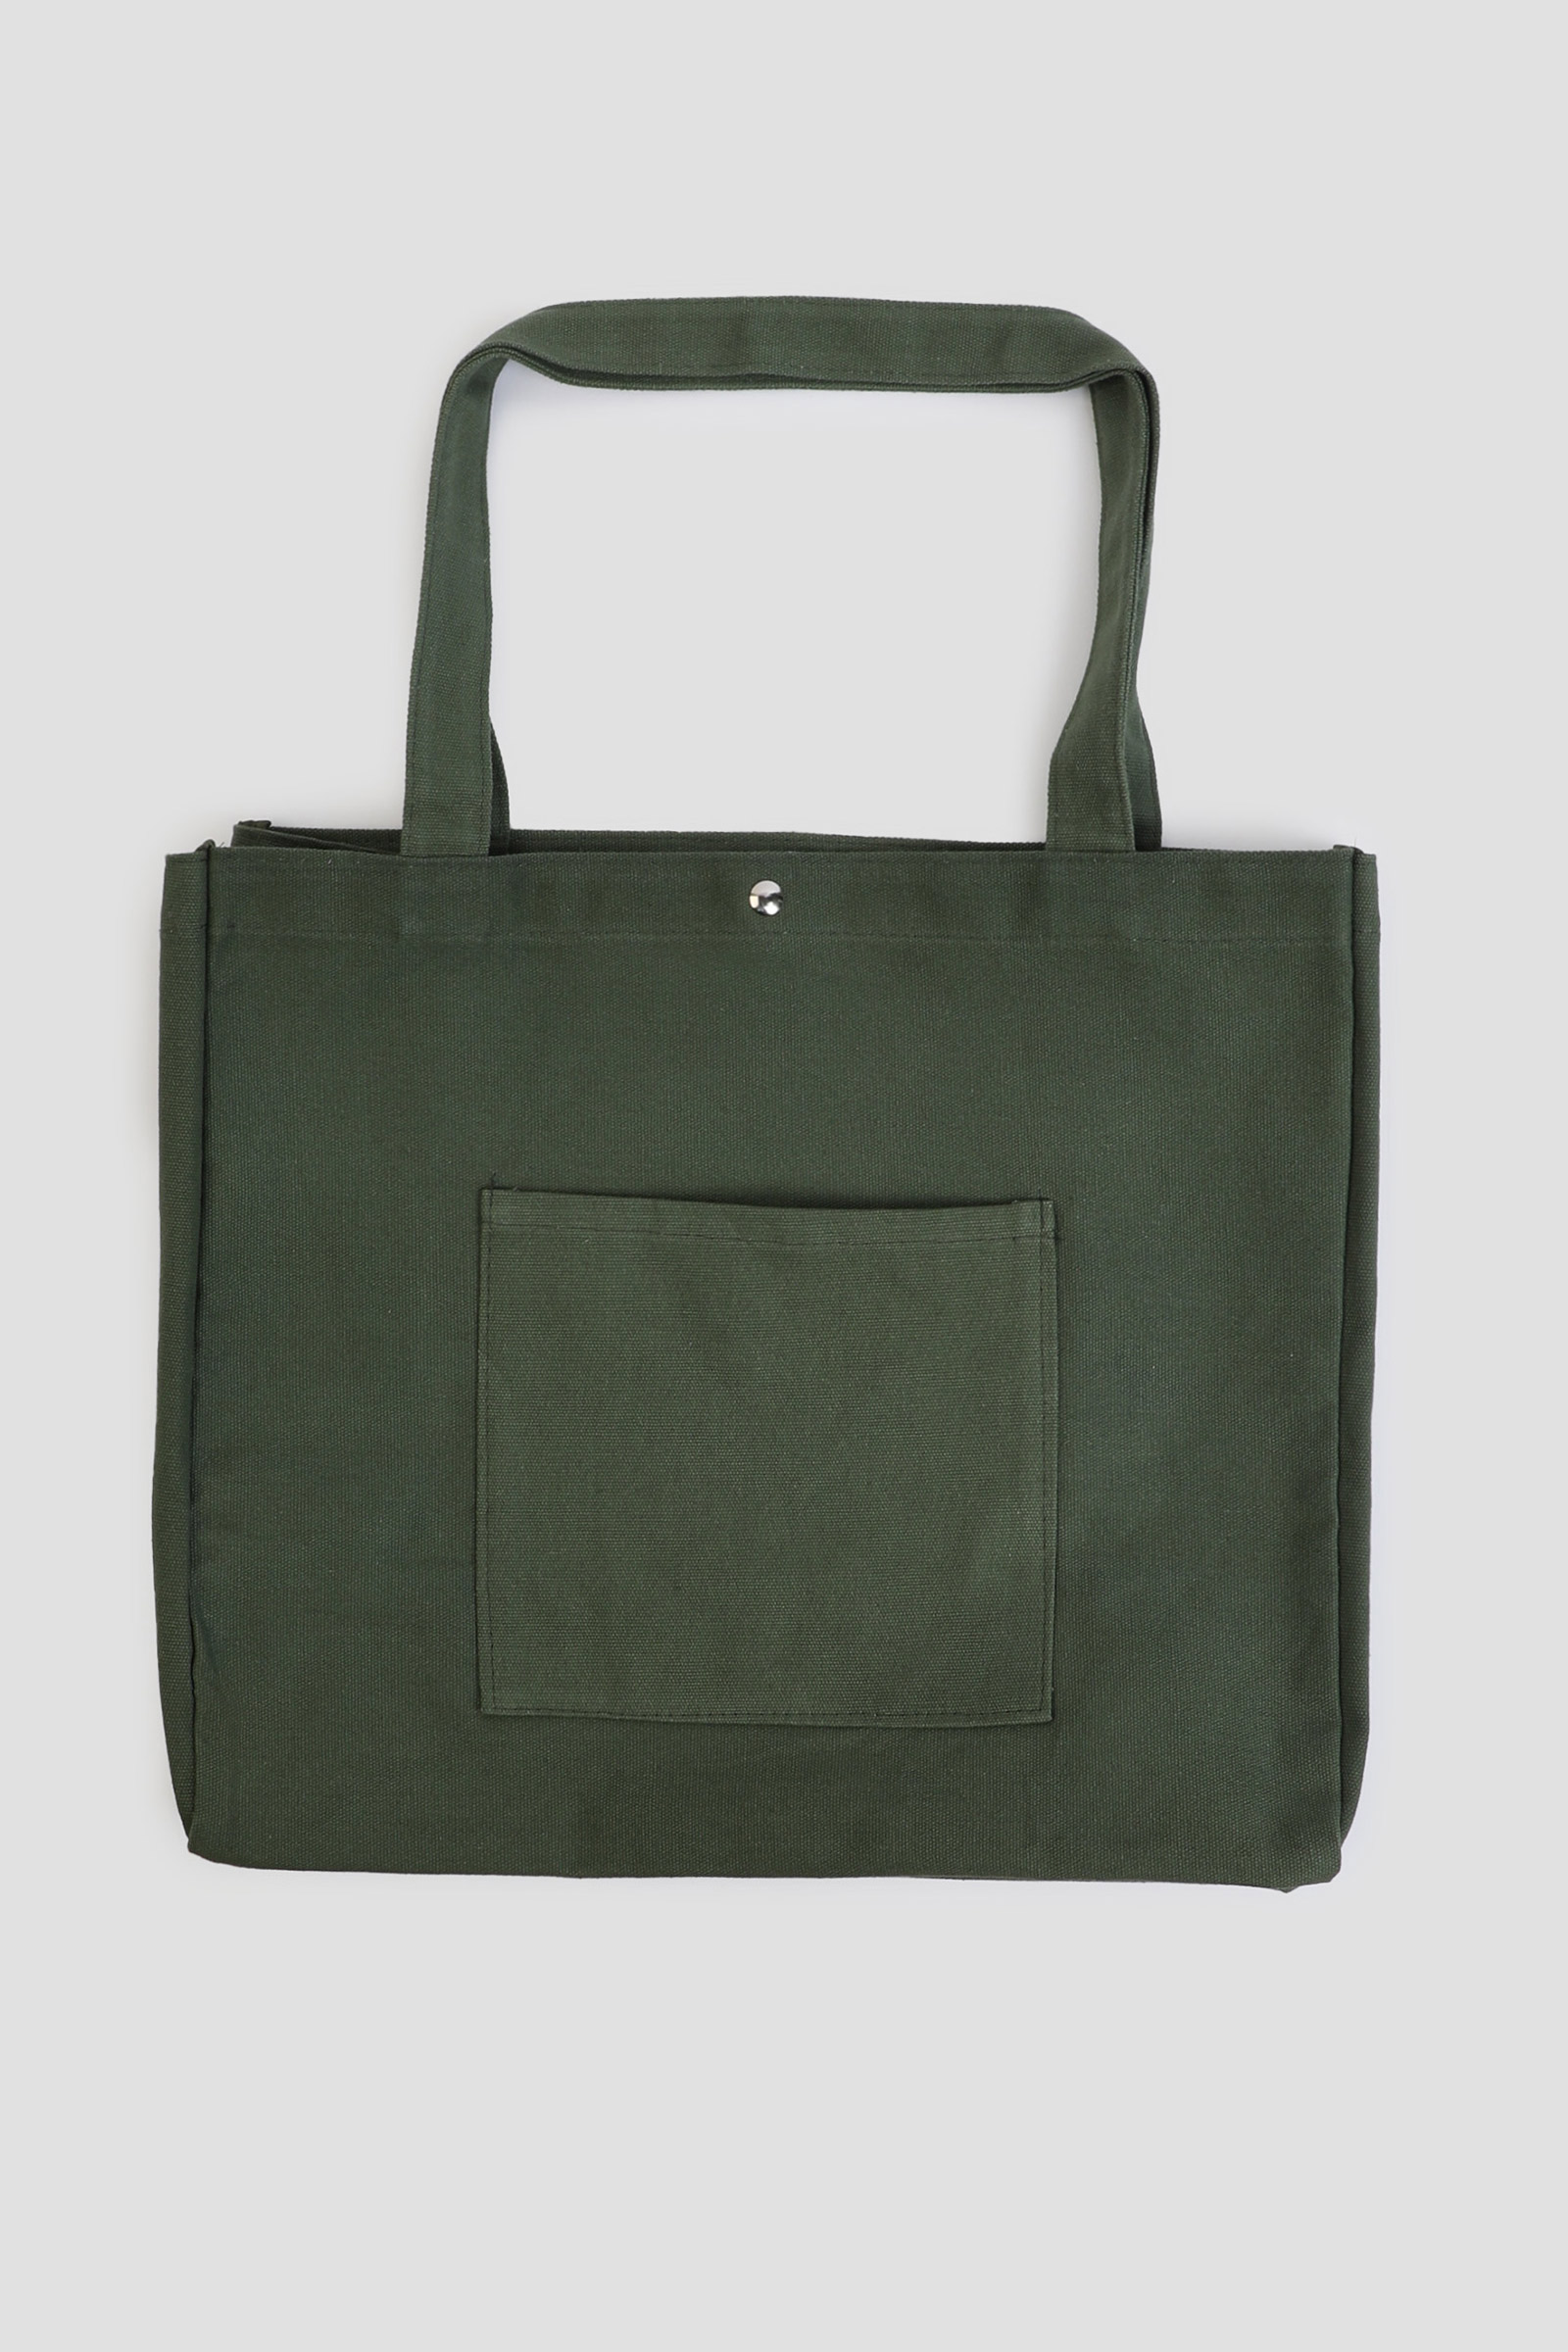 Ardene Large Canvas Tote Bag in Dark Green | Polyester/Cotton | Eco-Conscious